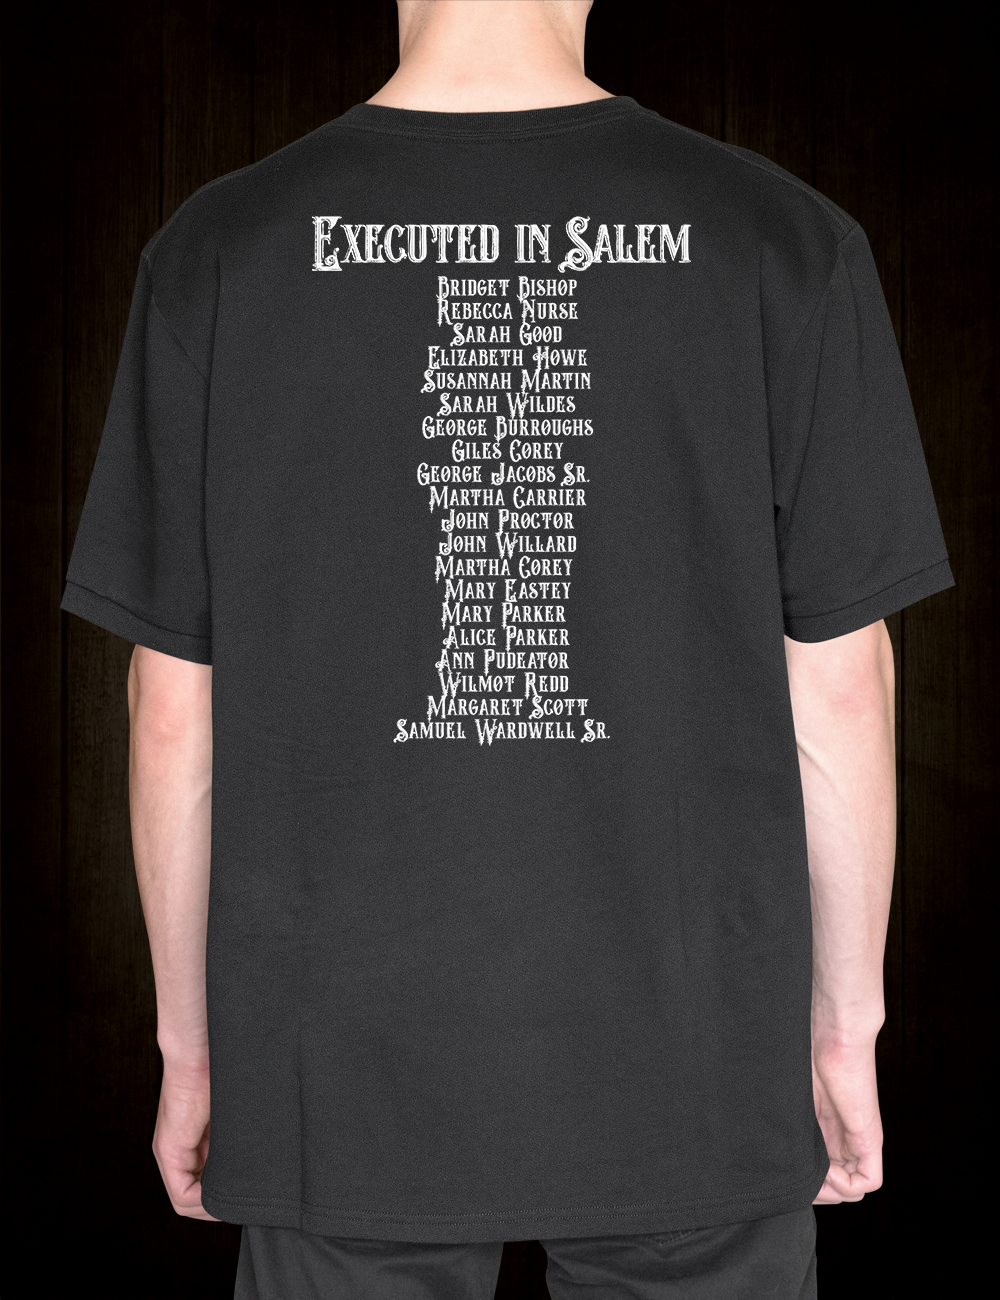 Occult History T-Shirt Salem Witch Trials